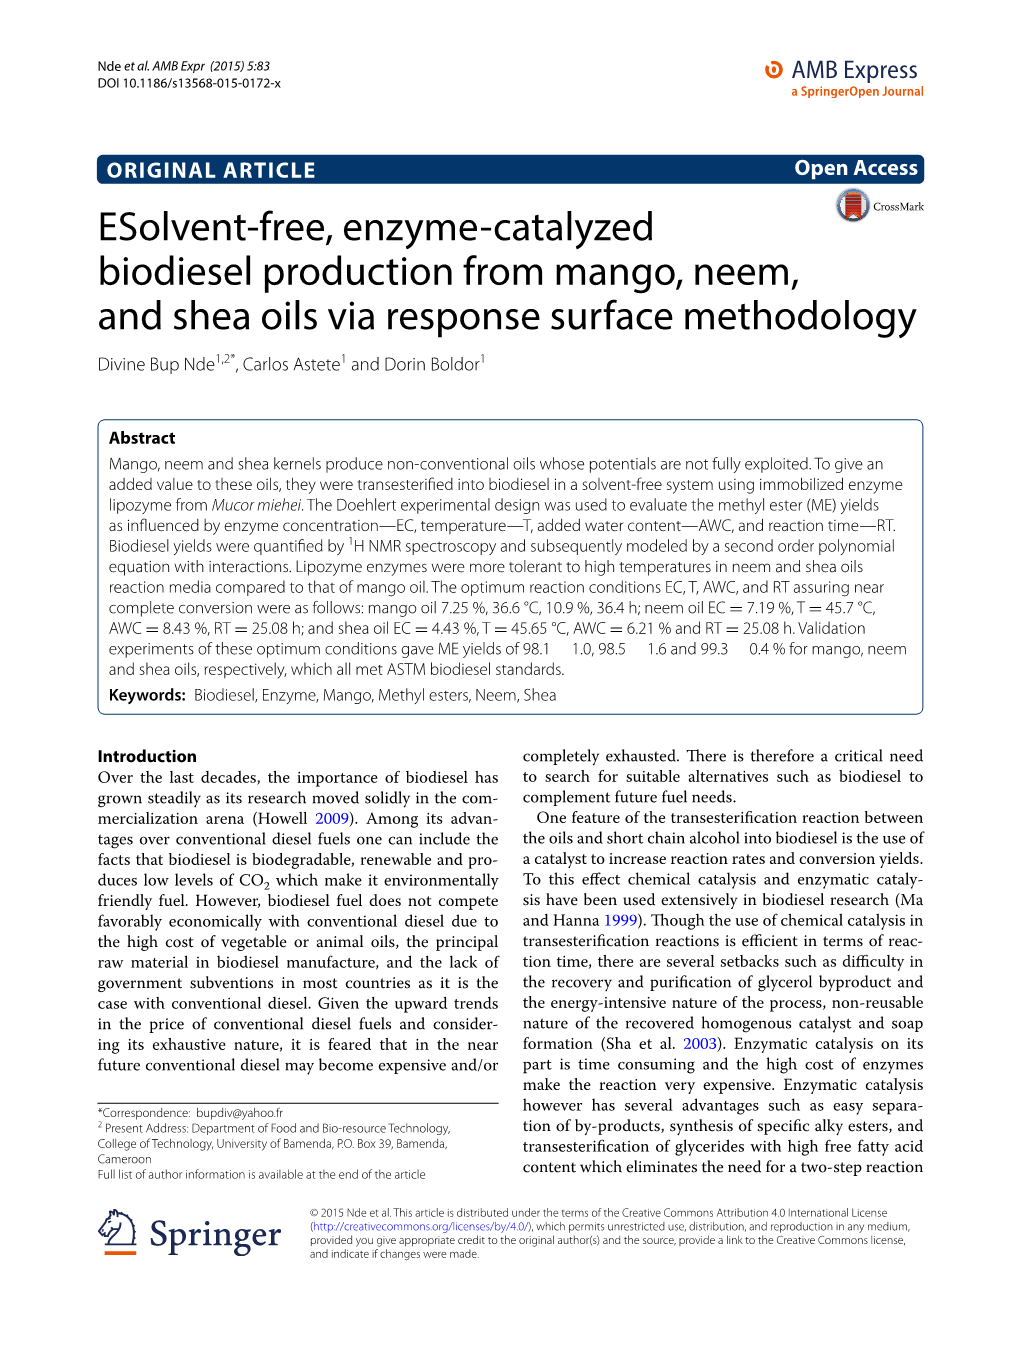 Esolvent-Free, Enzyme-Catalyzed Biodiesel Production from Mango, Neem, and Shea Oils Via Response Surface Methodology